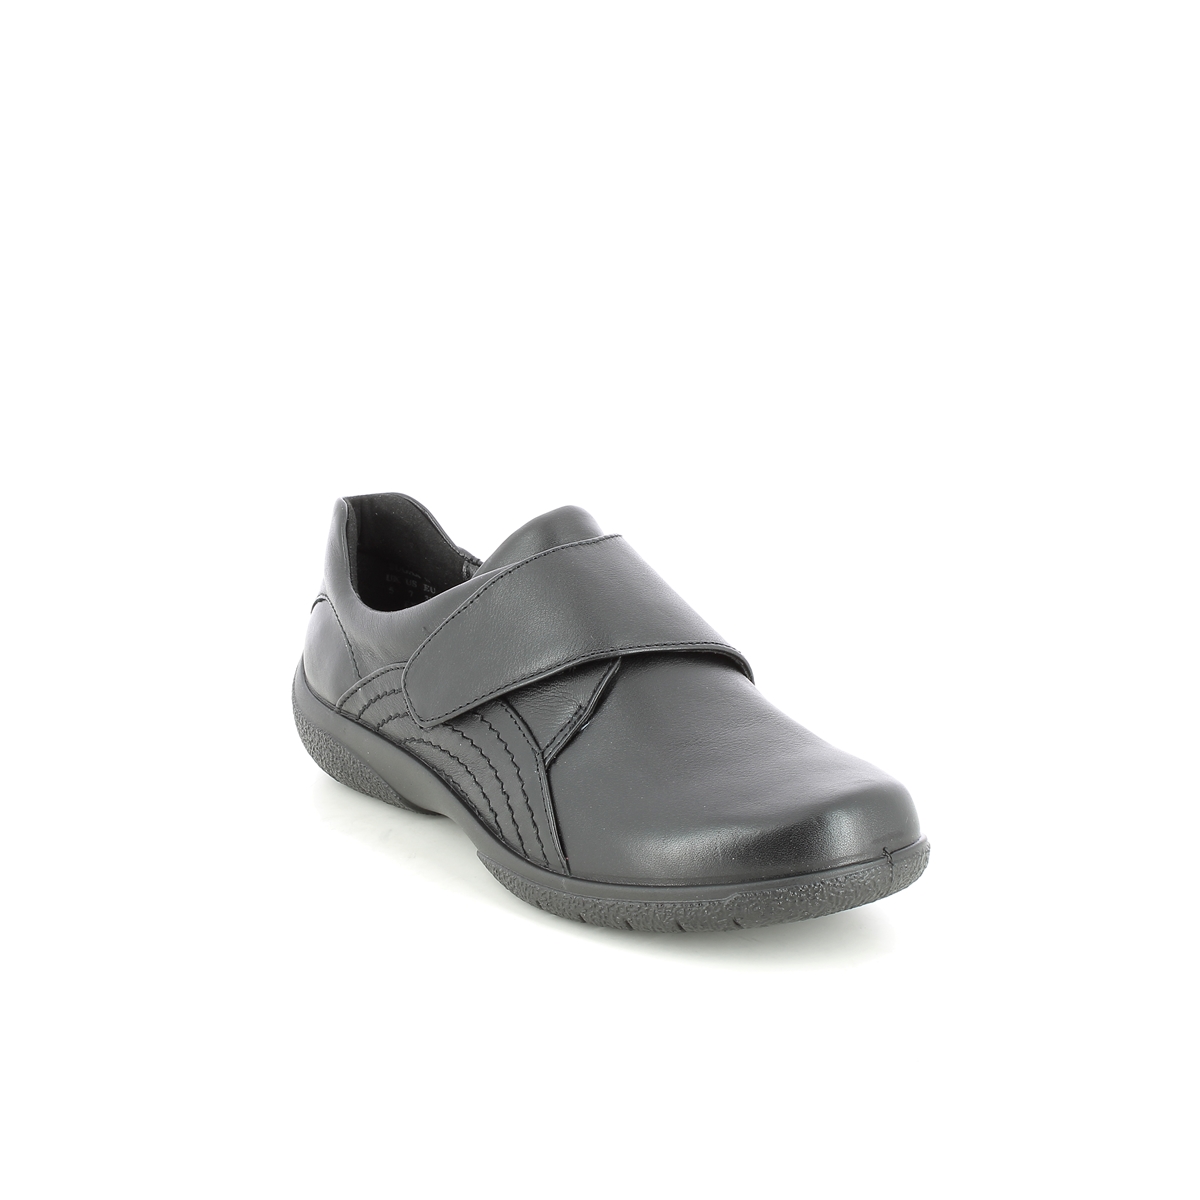 Hotter Sugar 2 Wide Black leather Womens Comfort Slip On Shoes 12011-30 in a Plain Leather in Size 4.5